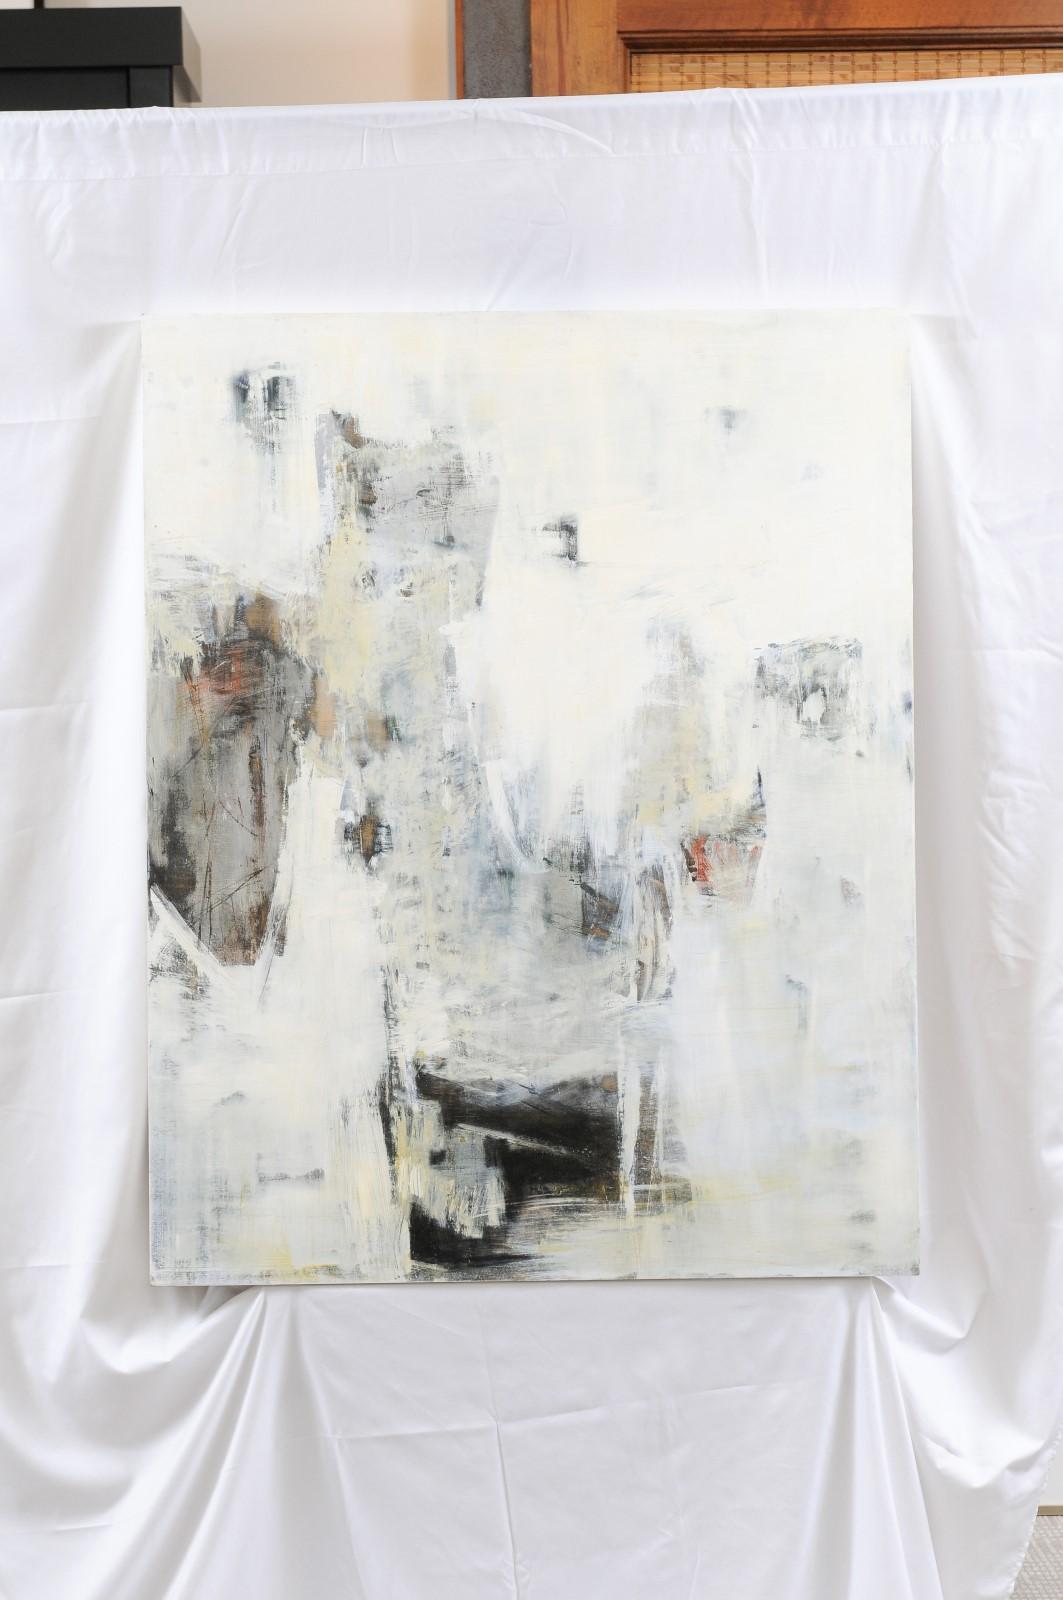 Dixie Taylor Purvis is an abstract painter known for her large abstracts – oil on panel. The abstracts are remarkable for the strong and varied marks and the bold colors. The abstracts explode and surprise, moving out from the middle and in from the